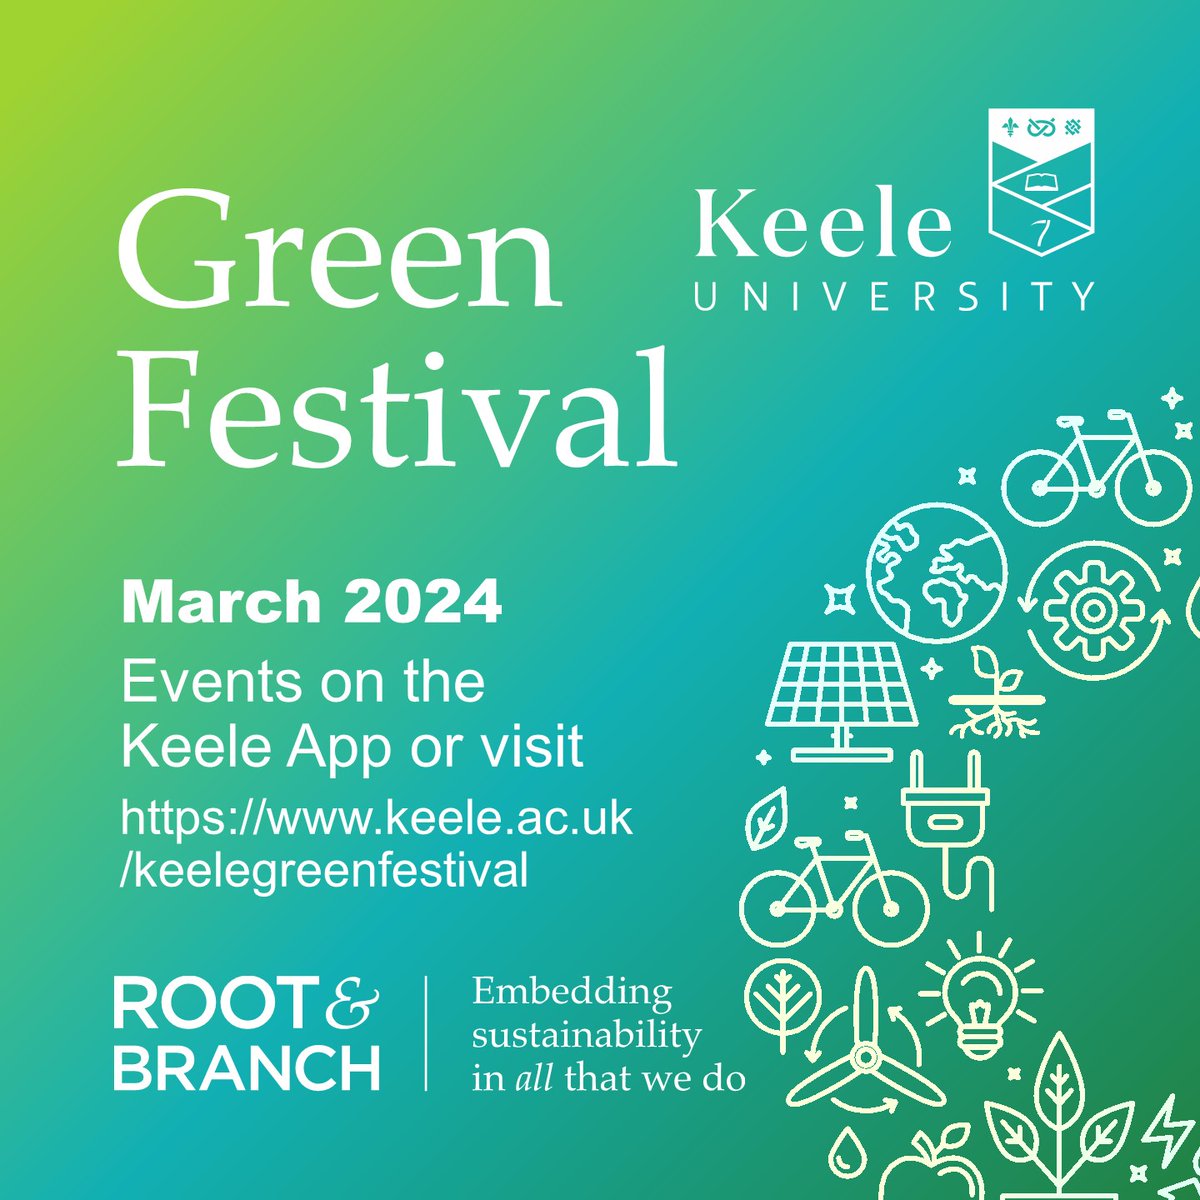 #KeeleGreenFestival begins today! Celebrating sustainability at Keele through events, talks, campaigns and activities... embedding sustainability in all that we do 🌱 View the schedule: keele.ac.uk/KeeleGreenFest… #GreenKeele @sustfuturekeele @KeeleUniversity